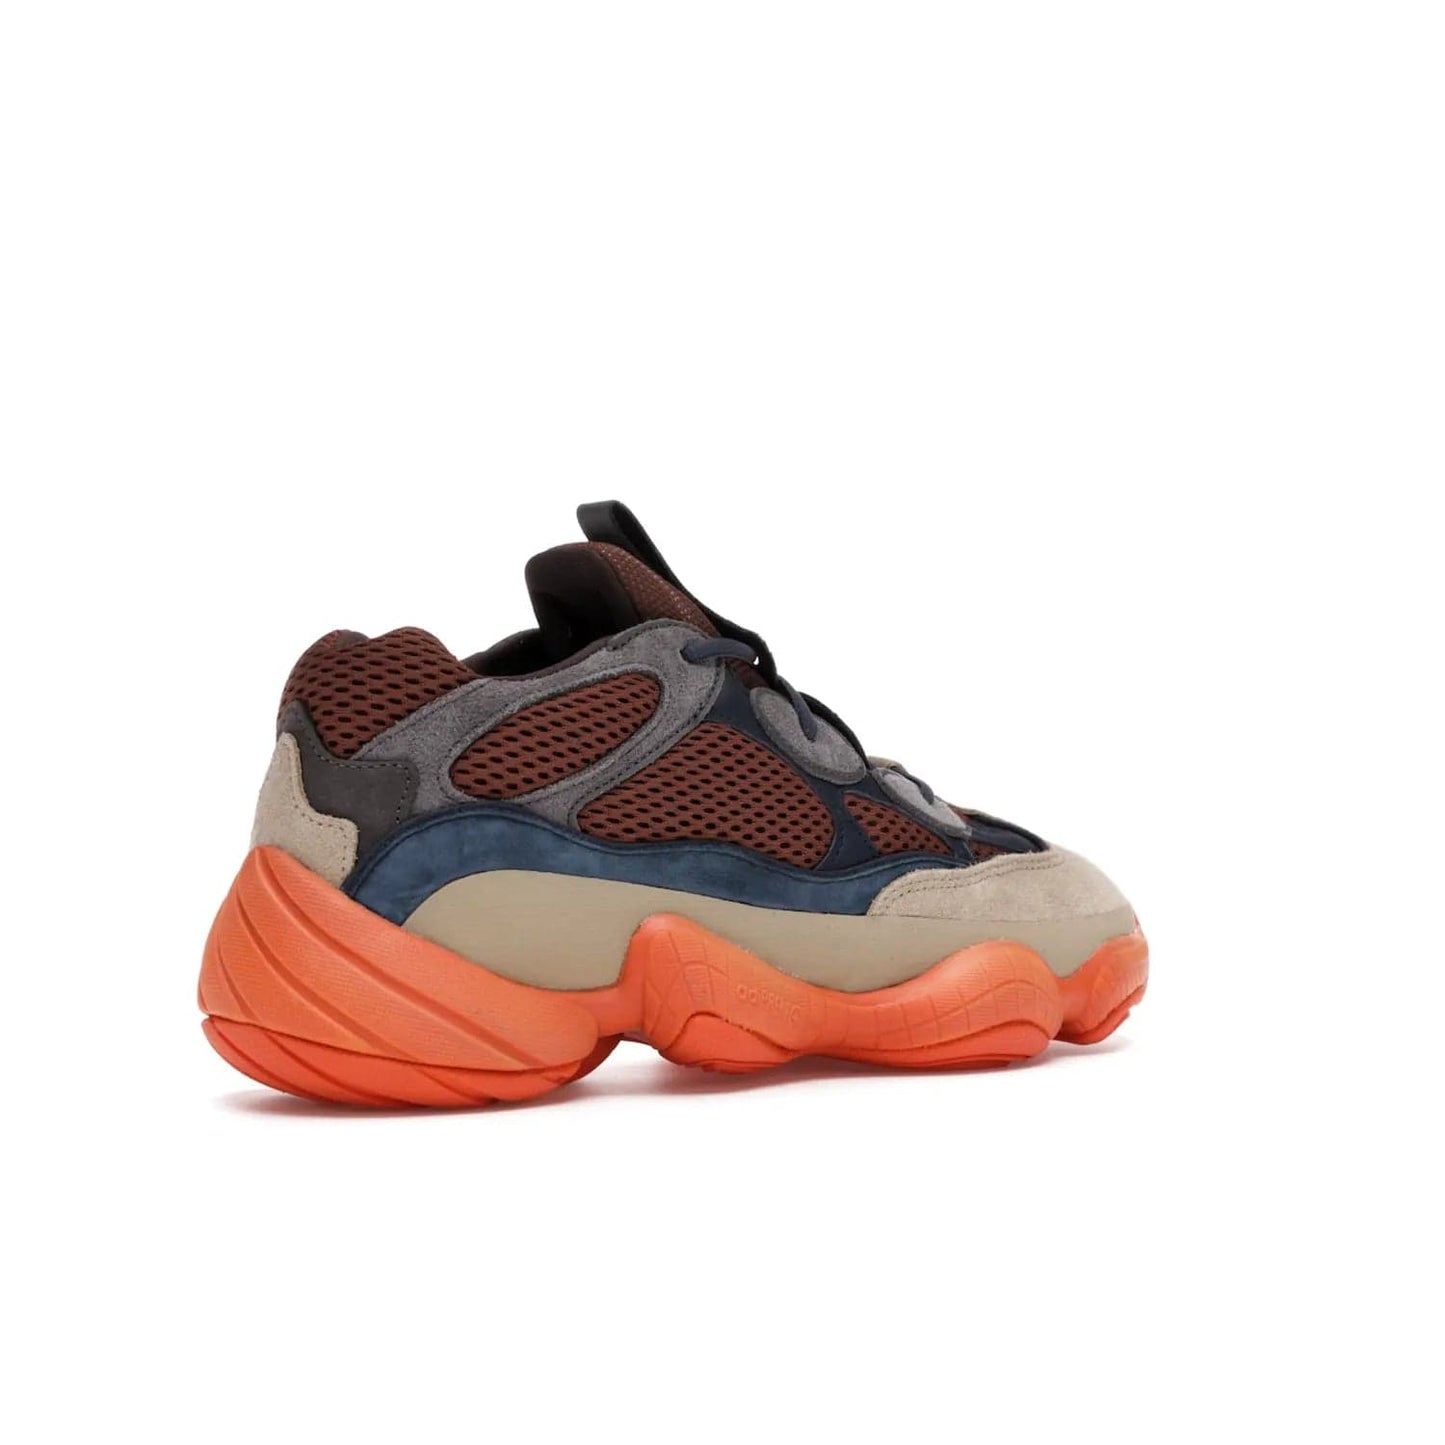 adidas Yeezy 500 Enflame - Image 33 - Only at www.BallersClubKickz.com - Step into style with the adidas Yeezy 500 Enflame. Mix of mesh, leather, and suede layered together to create tonal-brown, dark blue, & orange. Orange AdiPRENE sole provides superior cushioning & comfort. Get yours and experience maximum style.